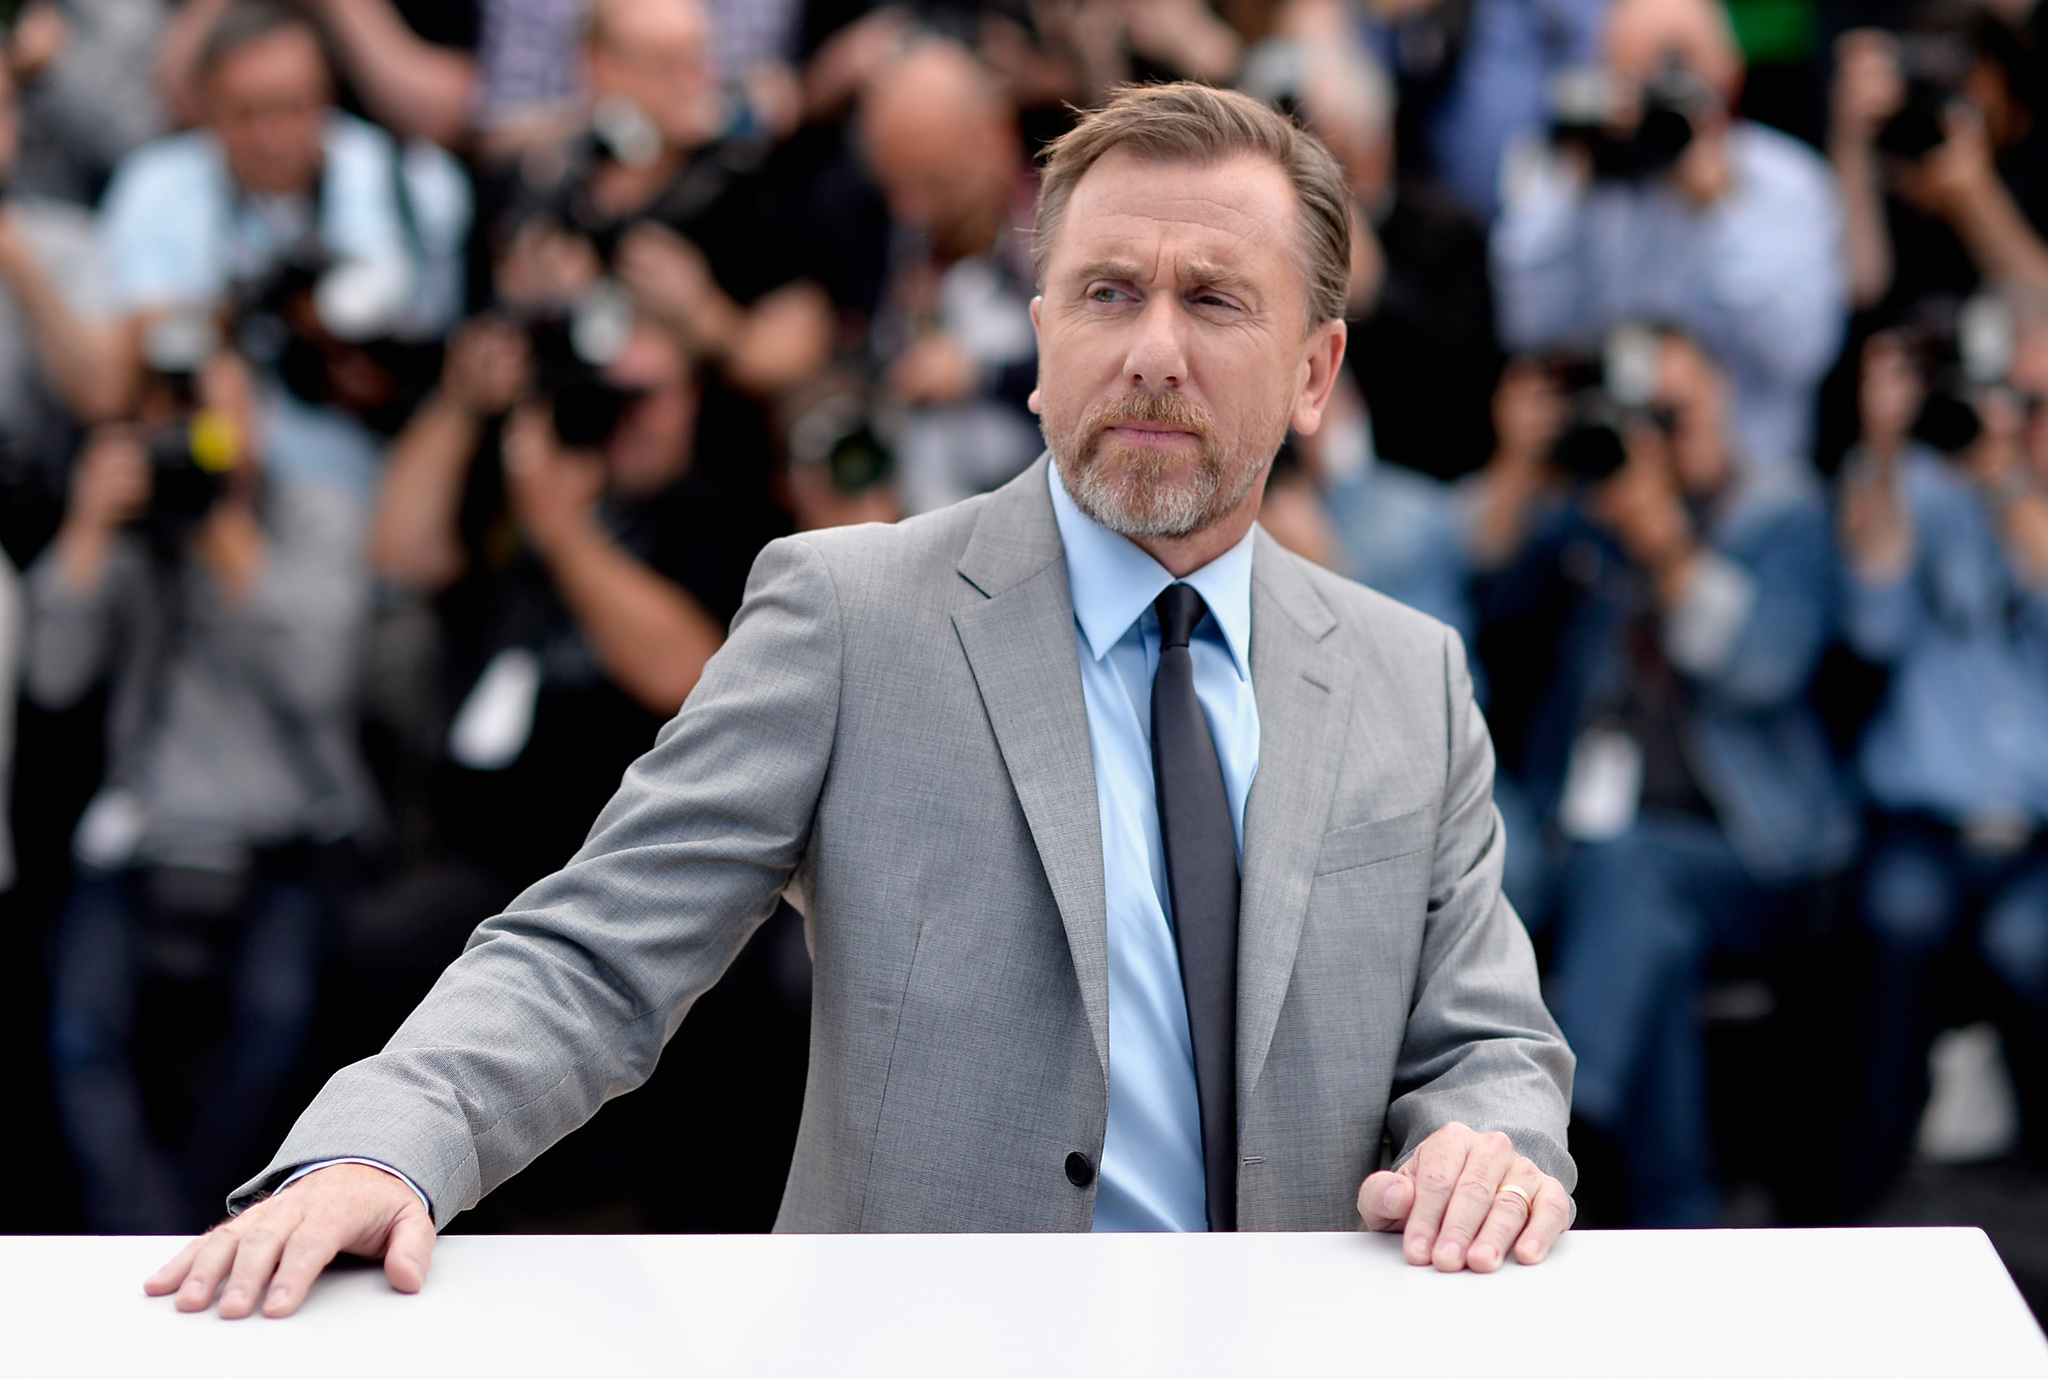 Tim Roth at event of Monako princese (2014)